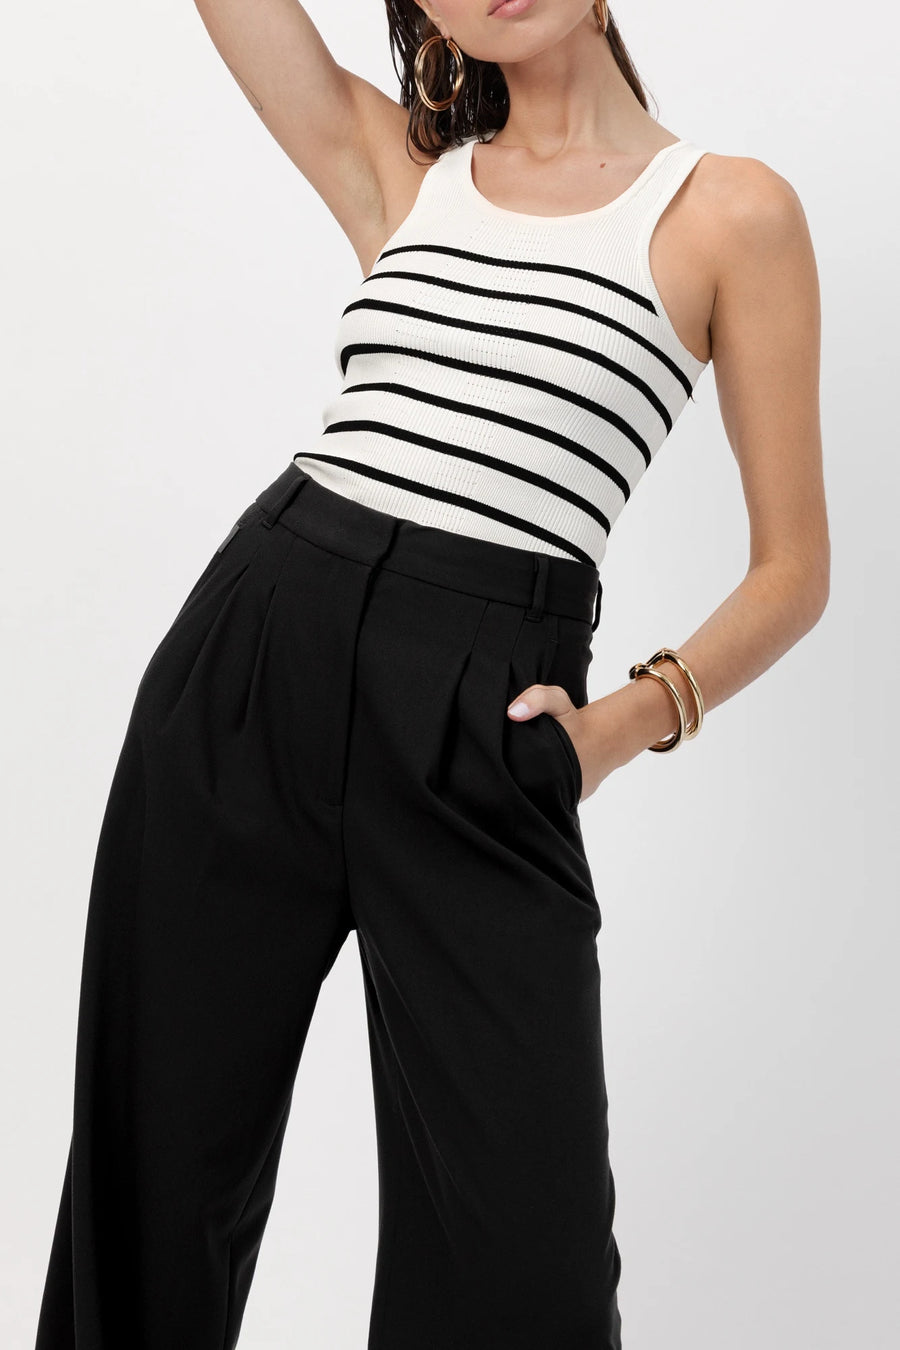 The Maccaden pleated trouser in black by Greyven